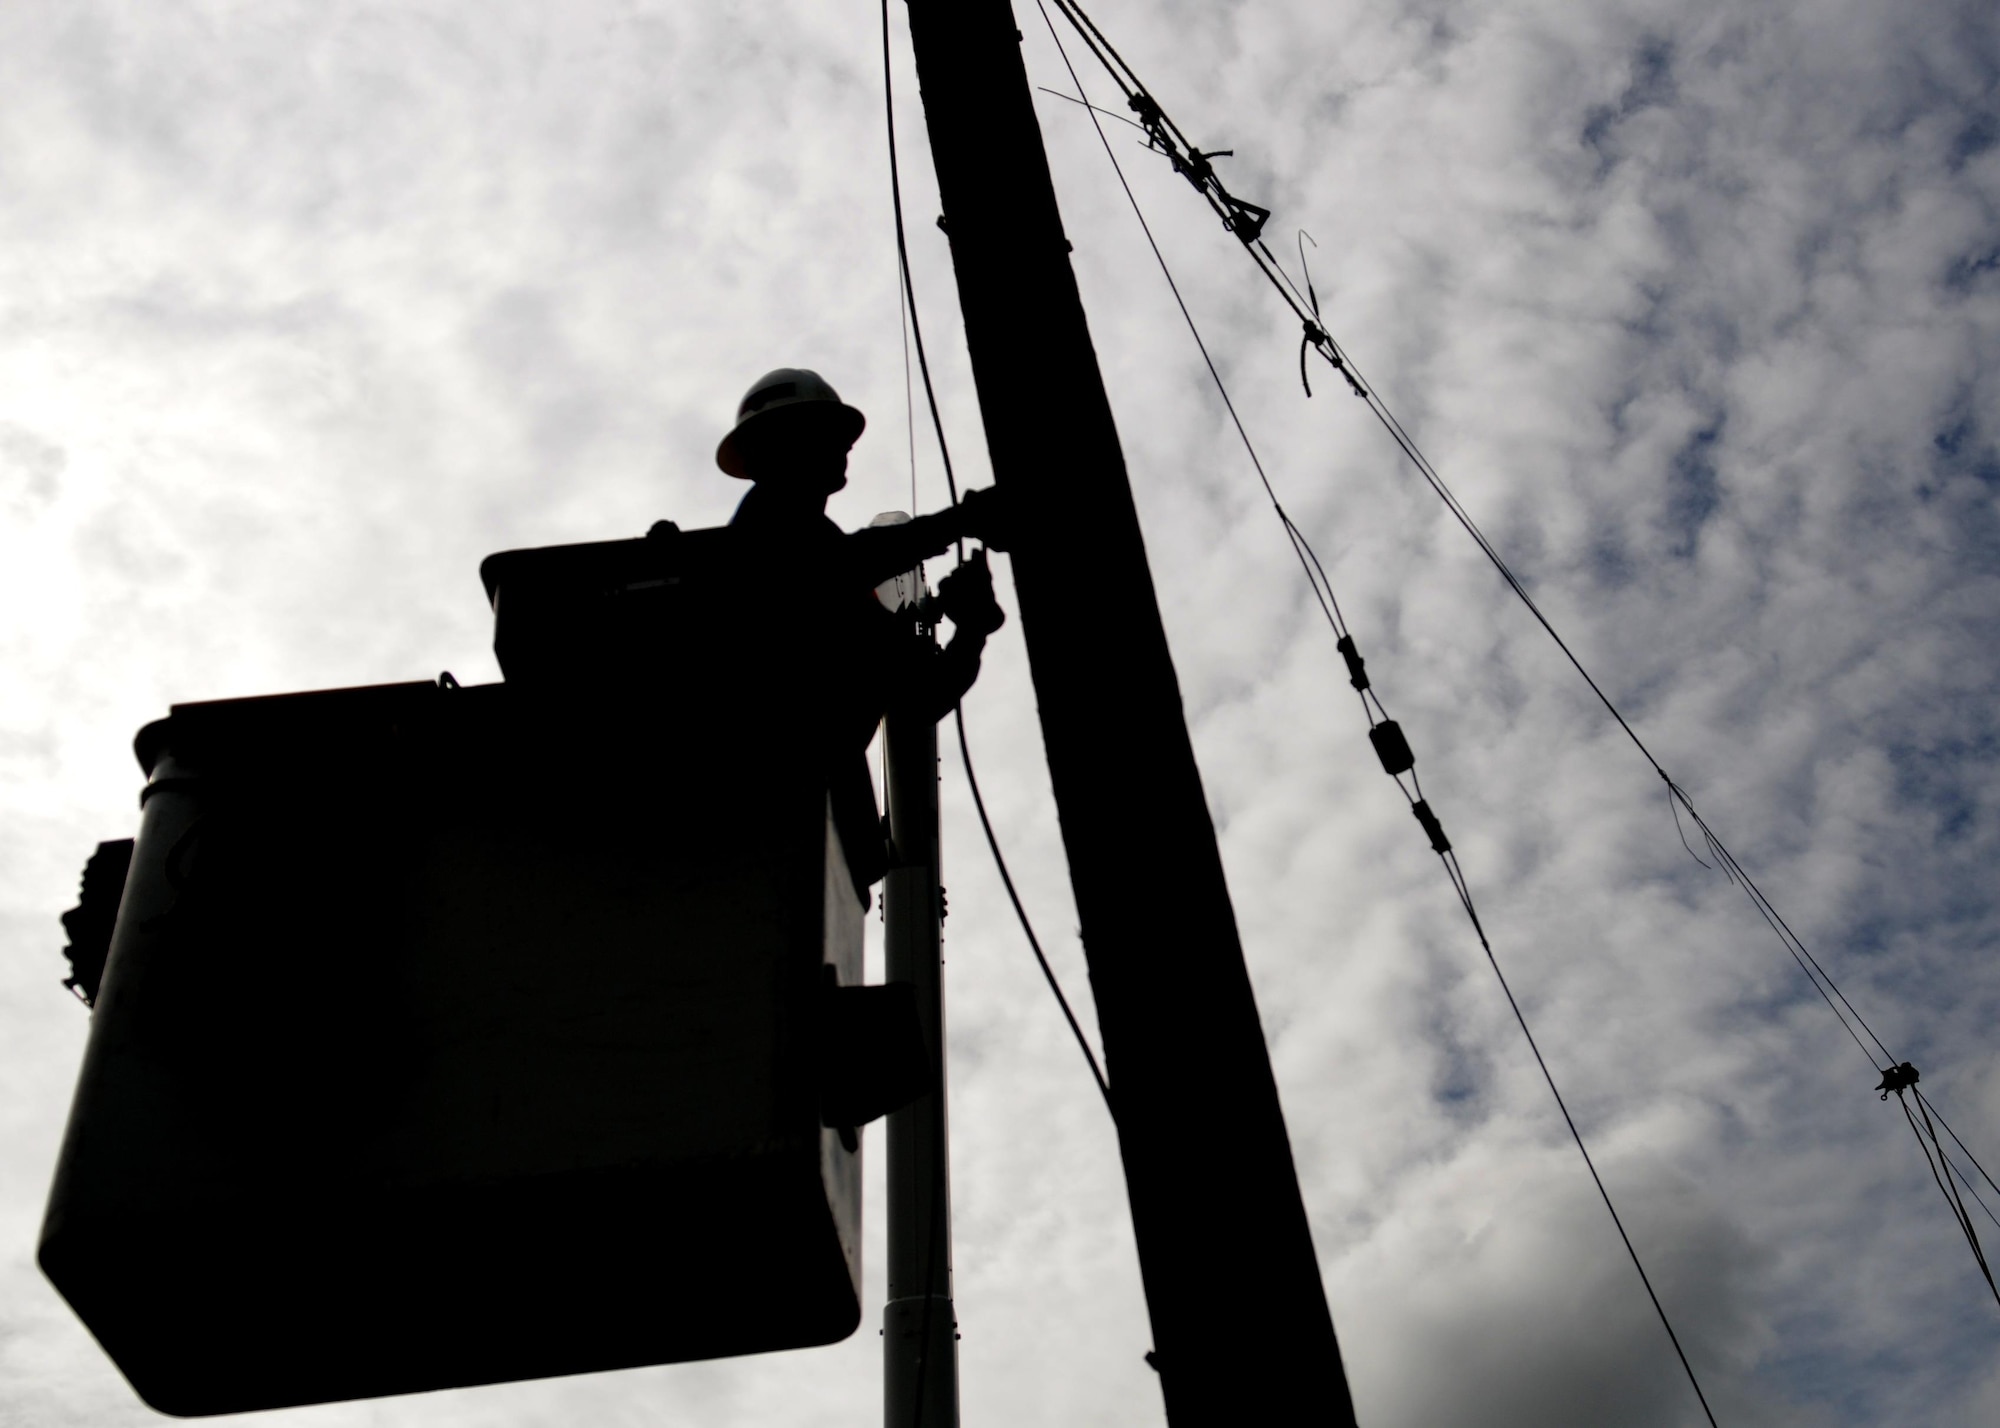 A construction worker prepares a power pole for removal at Beale Air Force Base, Calif. April 24, 2017. More than 200 poles are being replaced as part of an ongoing project to renovate Beale’s electrical infrastructure.